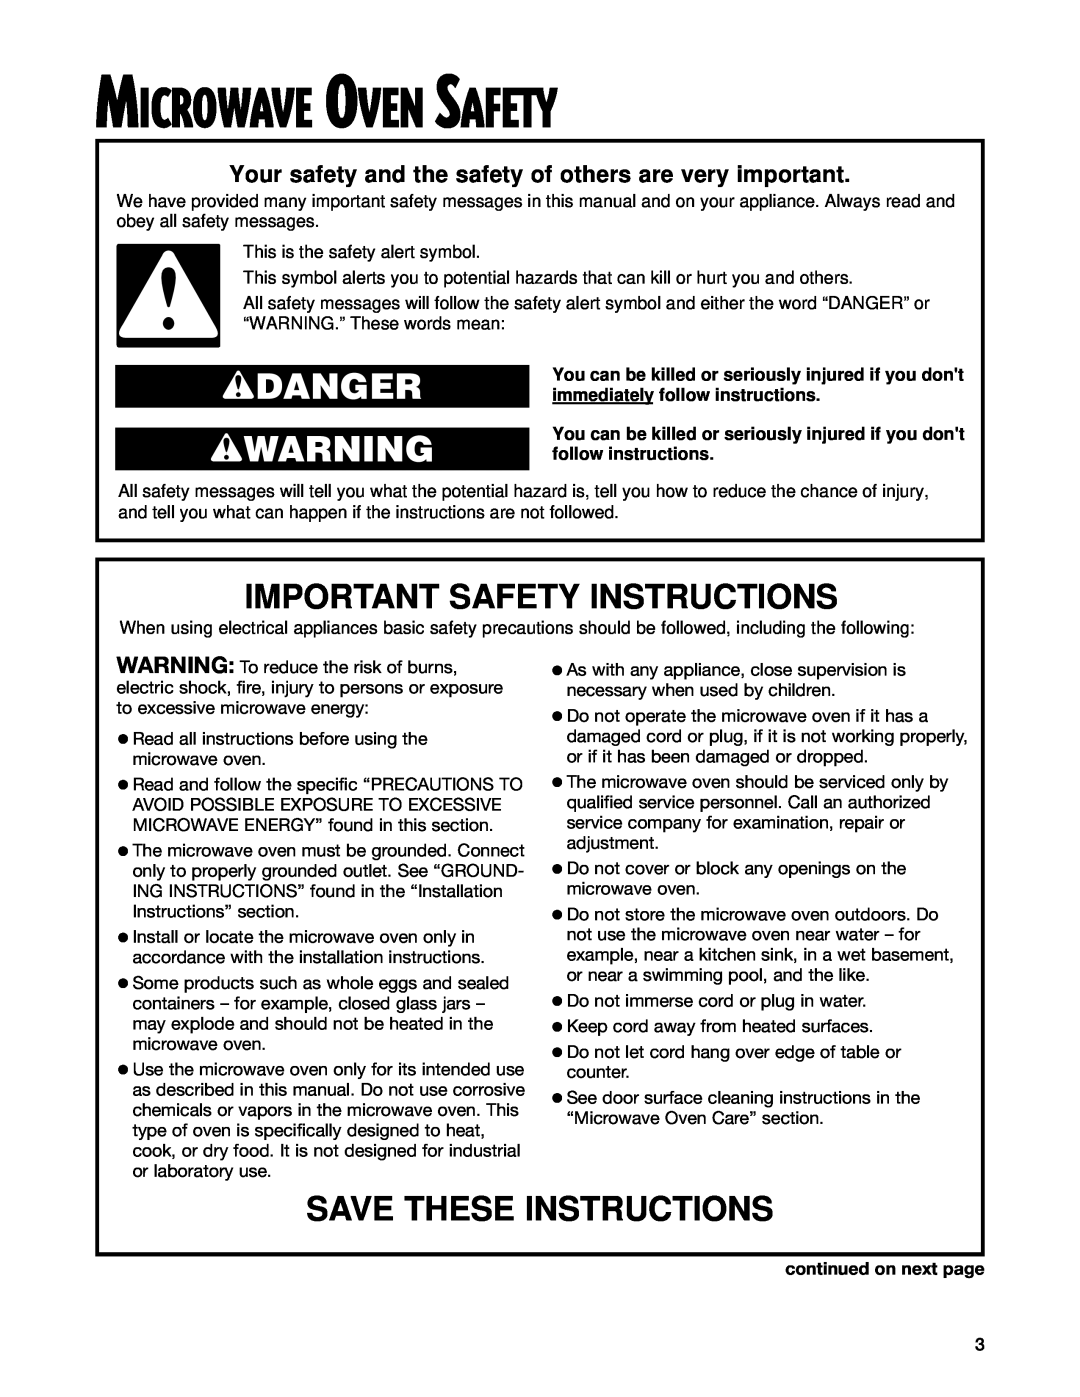 Whirlpool MT4145SK Microwave Oven Safety, wDANGER wWARNING, Important Safety Instructions, Save These Instructions 